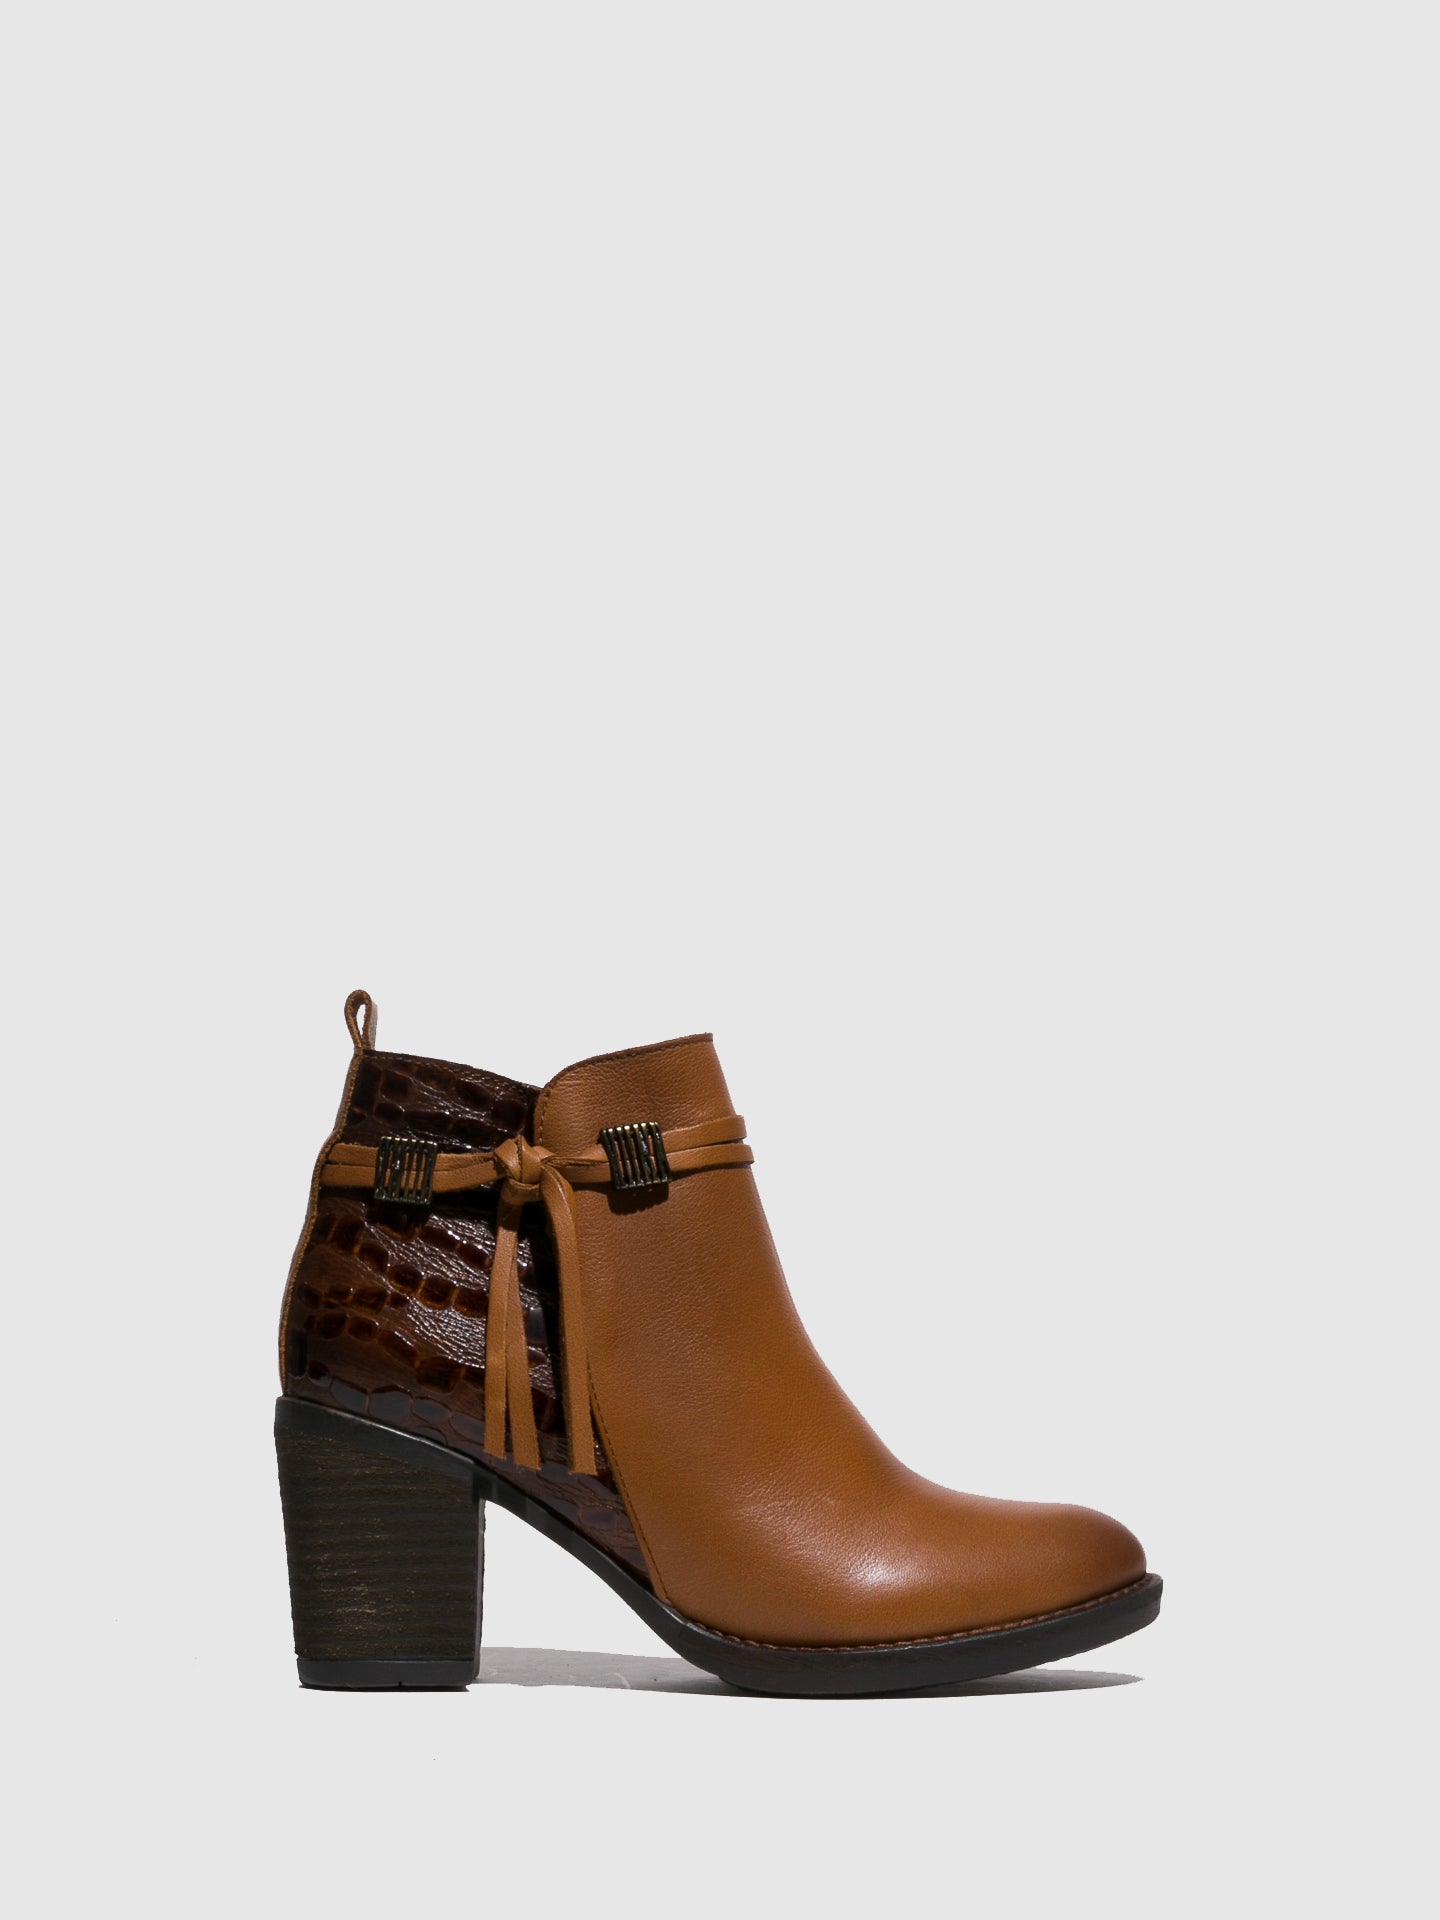 Foreva Camel Round Toe Ankle Boots